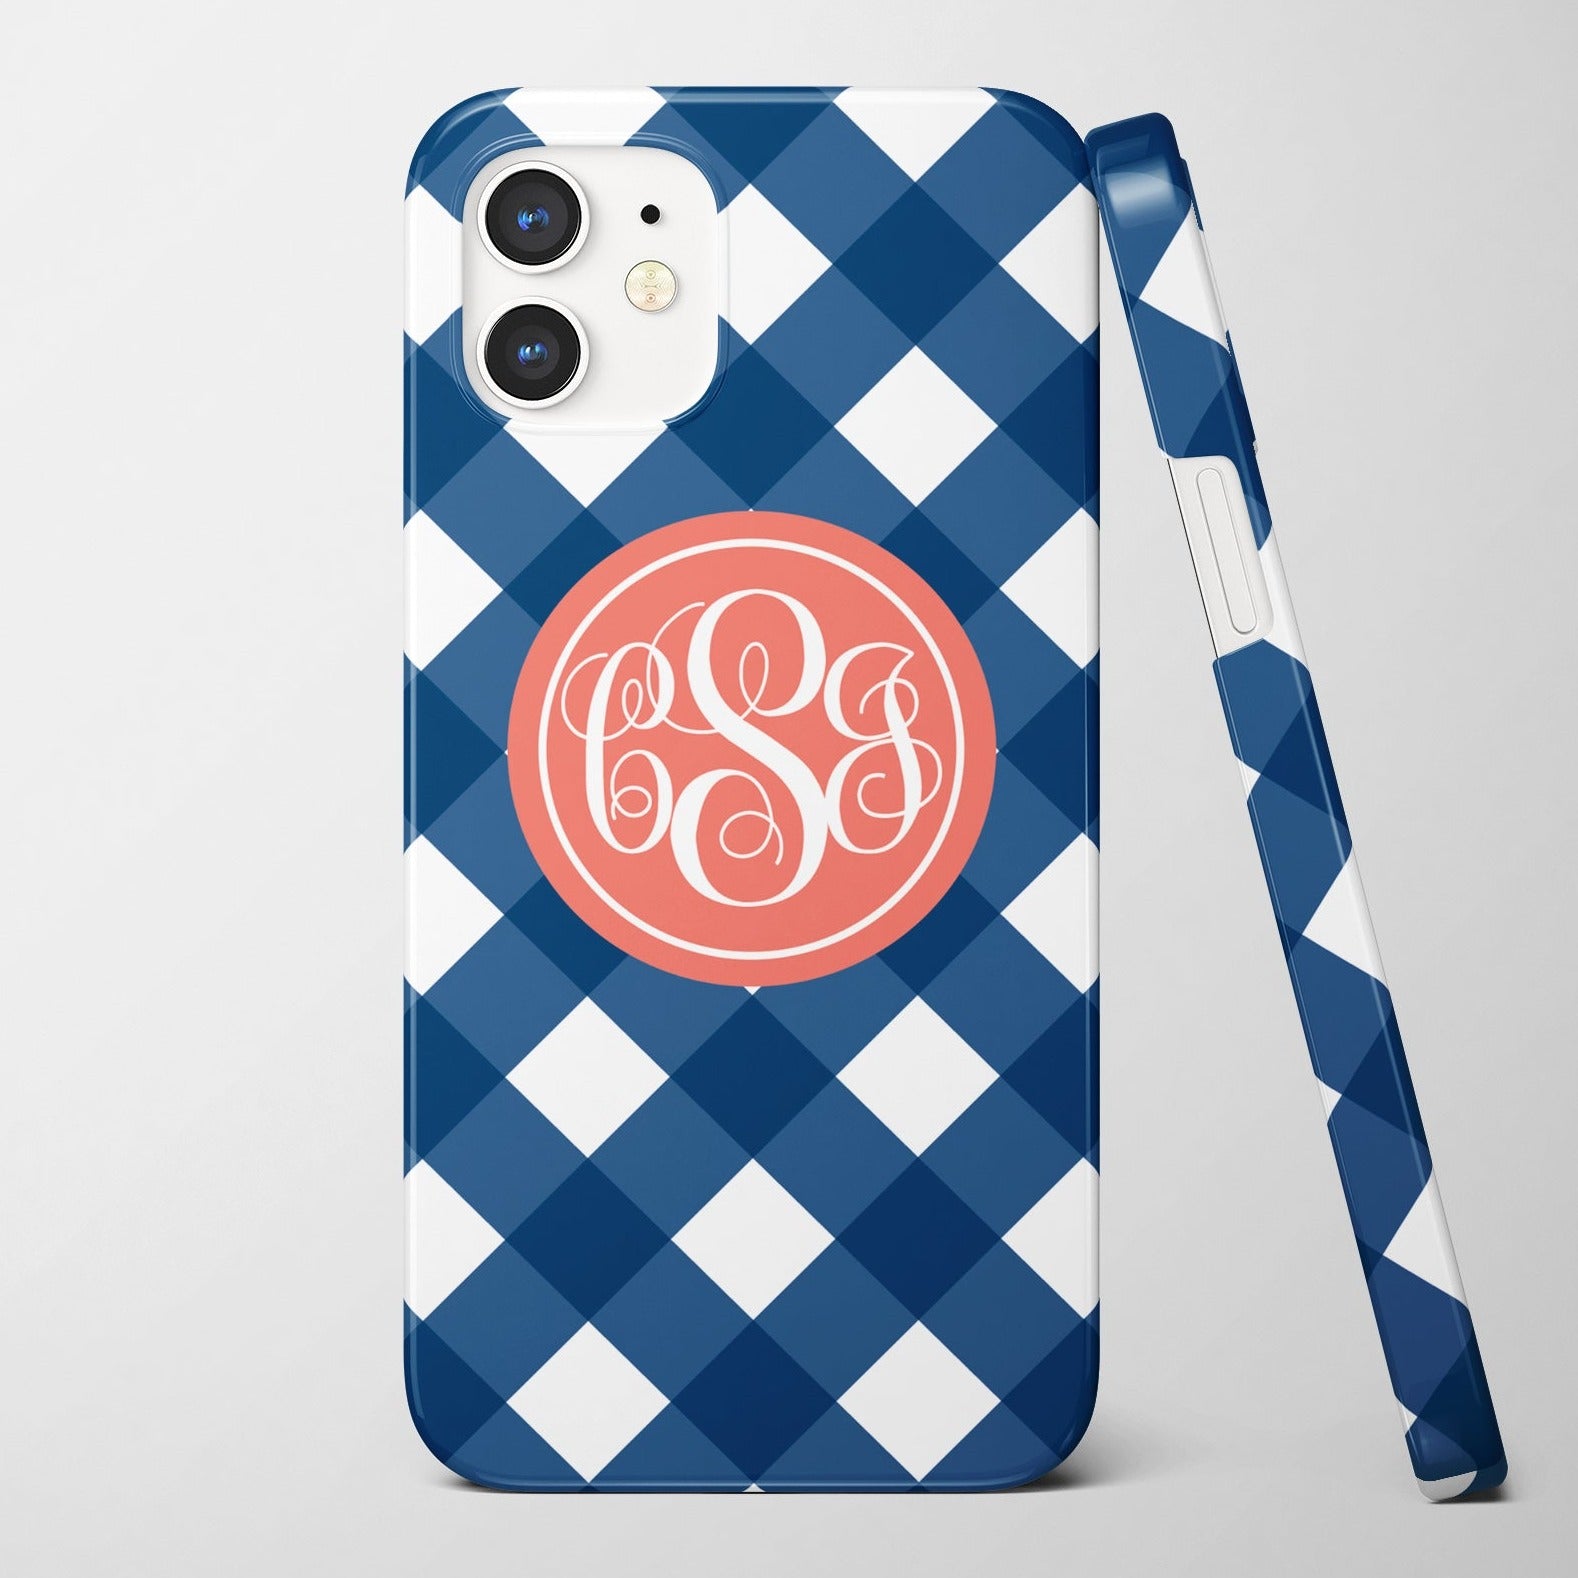 Personalized monogram iphone case with a gingham background